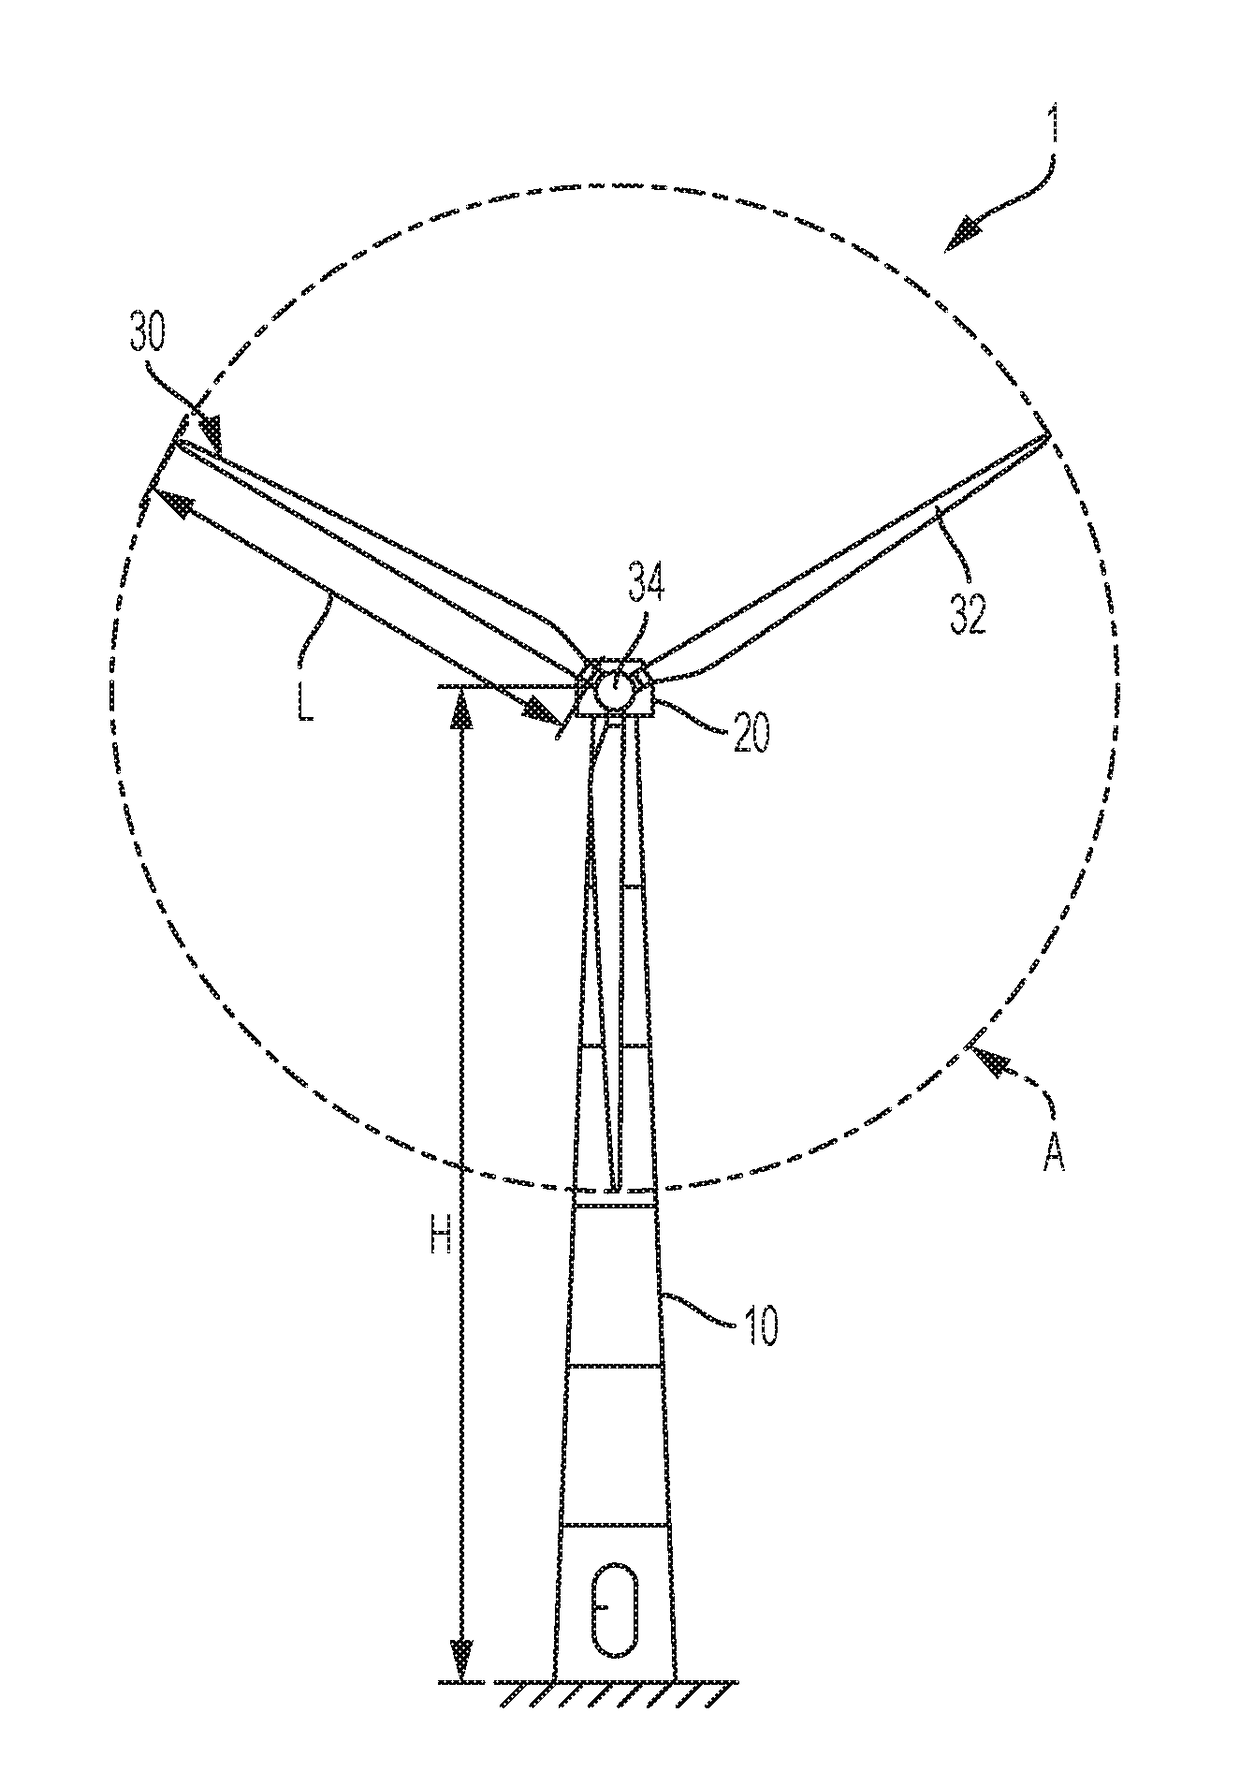 Control method and system for protection of wind turbines